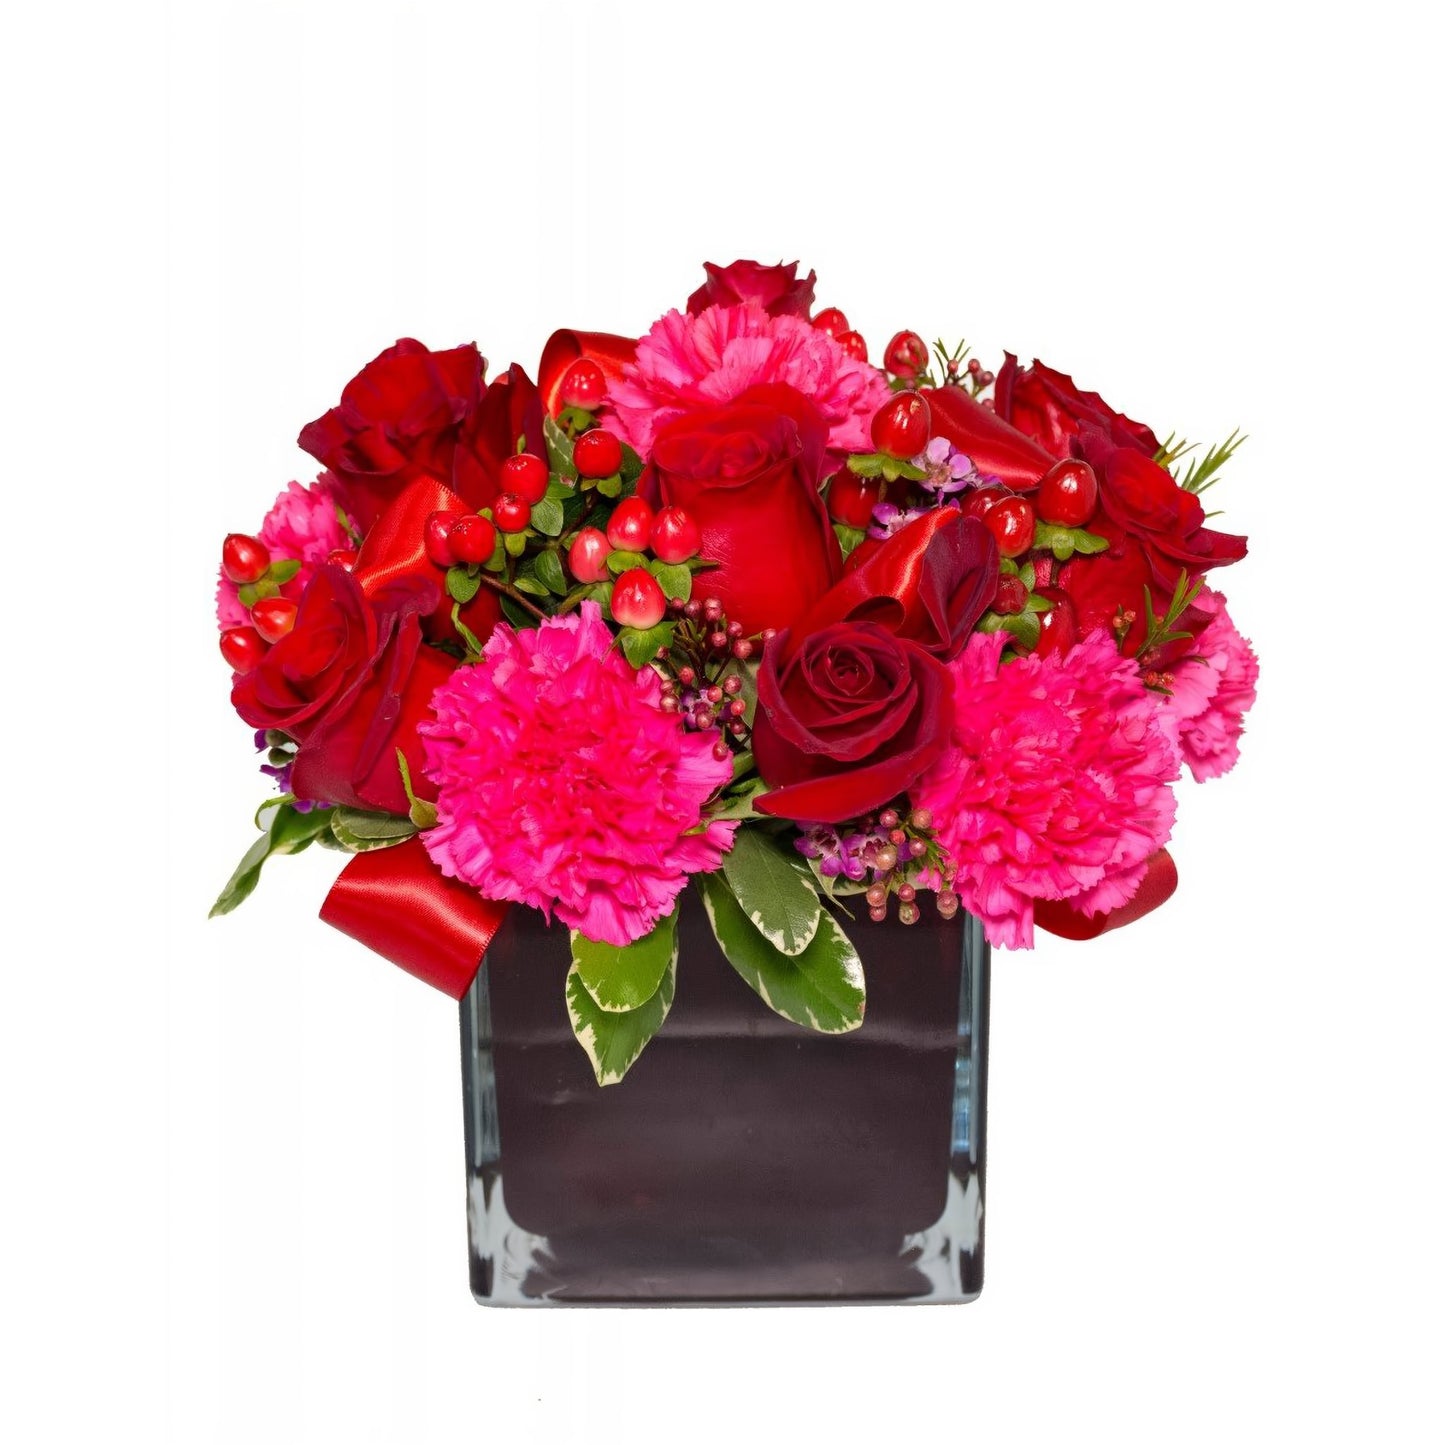 All Wrapped Up - Red - Floral Arrangement - Flower Delivery Brooklyn